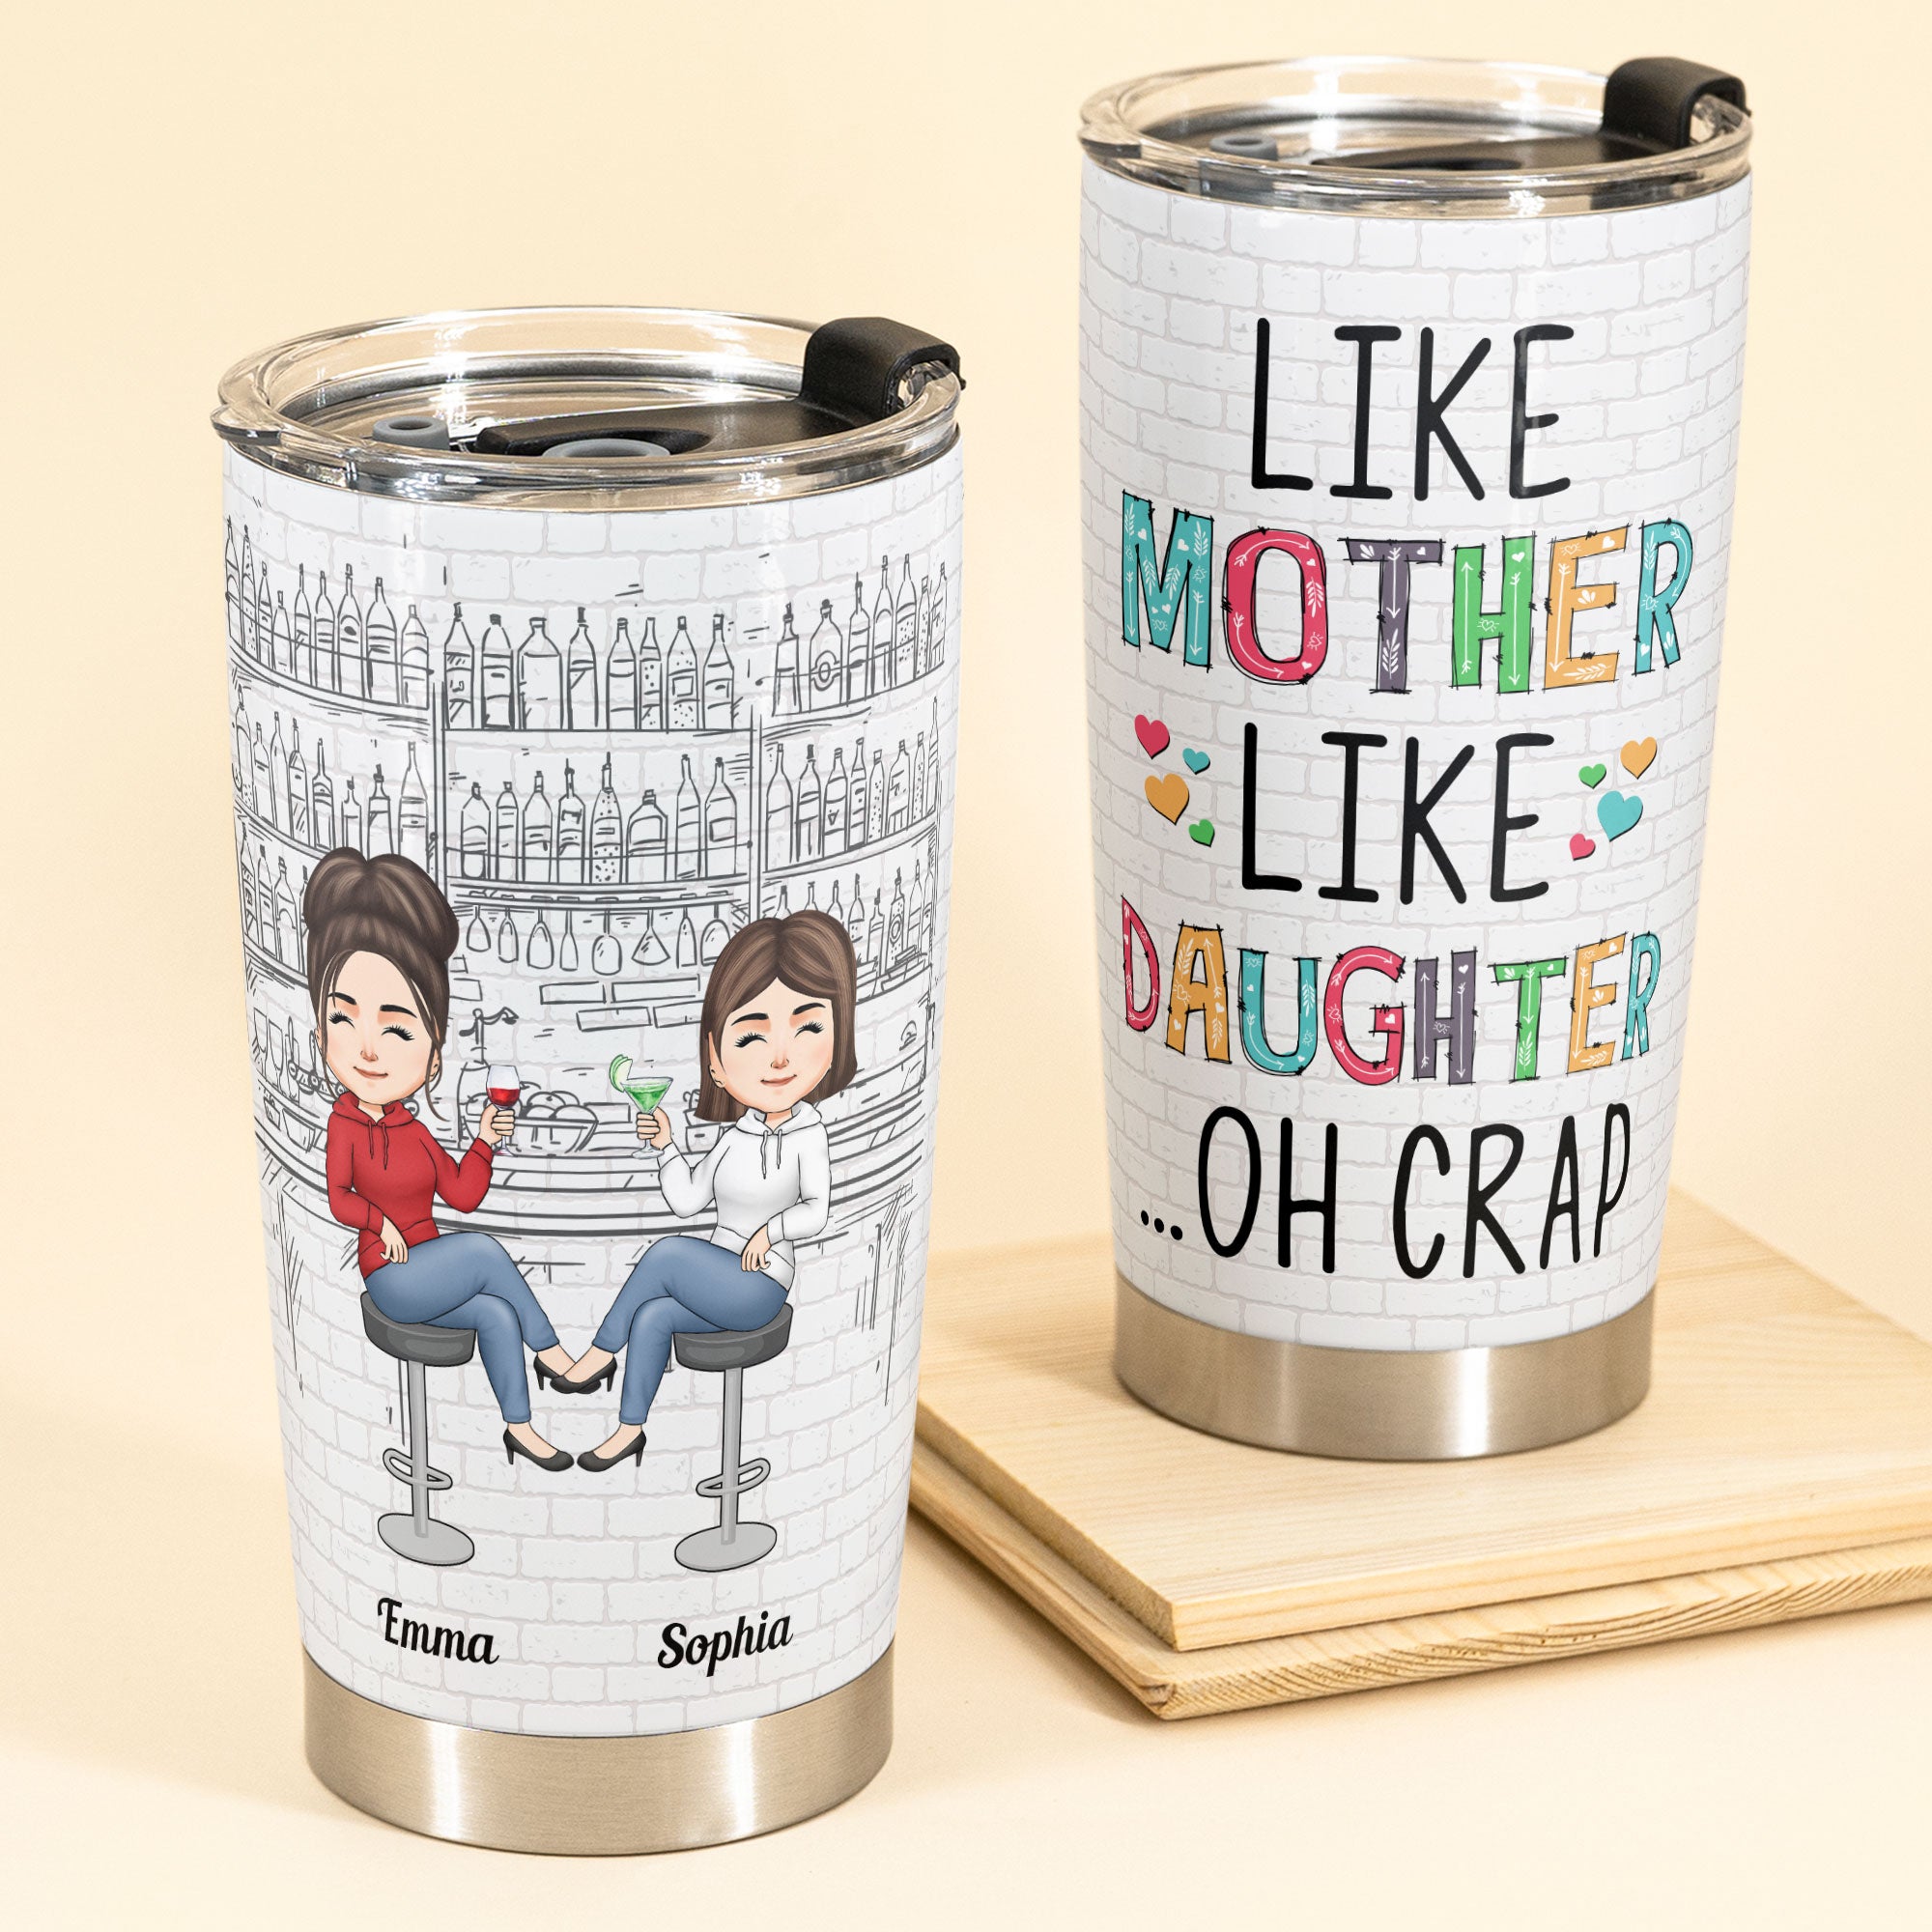 https://cdn.shopify.com/s/files/1/0499/6379/4592/products/Like-Mother-Like-Daughter-Chibi-Personalized-Tumbler-Cup-Birthday-Mothers-Day-For-Mom-Funny-Gift-For-Daughter-Gift-From-Daughter-Husband-Mom-02.jpg?v=1649065060